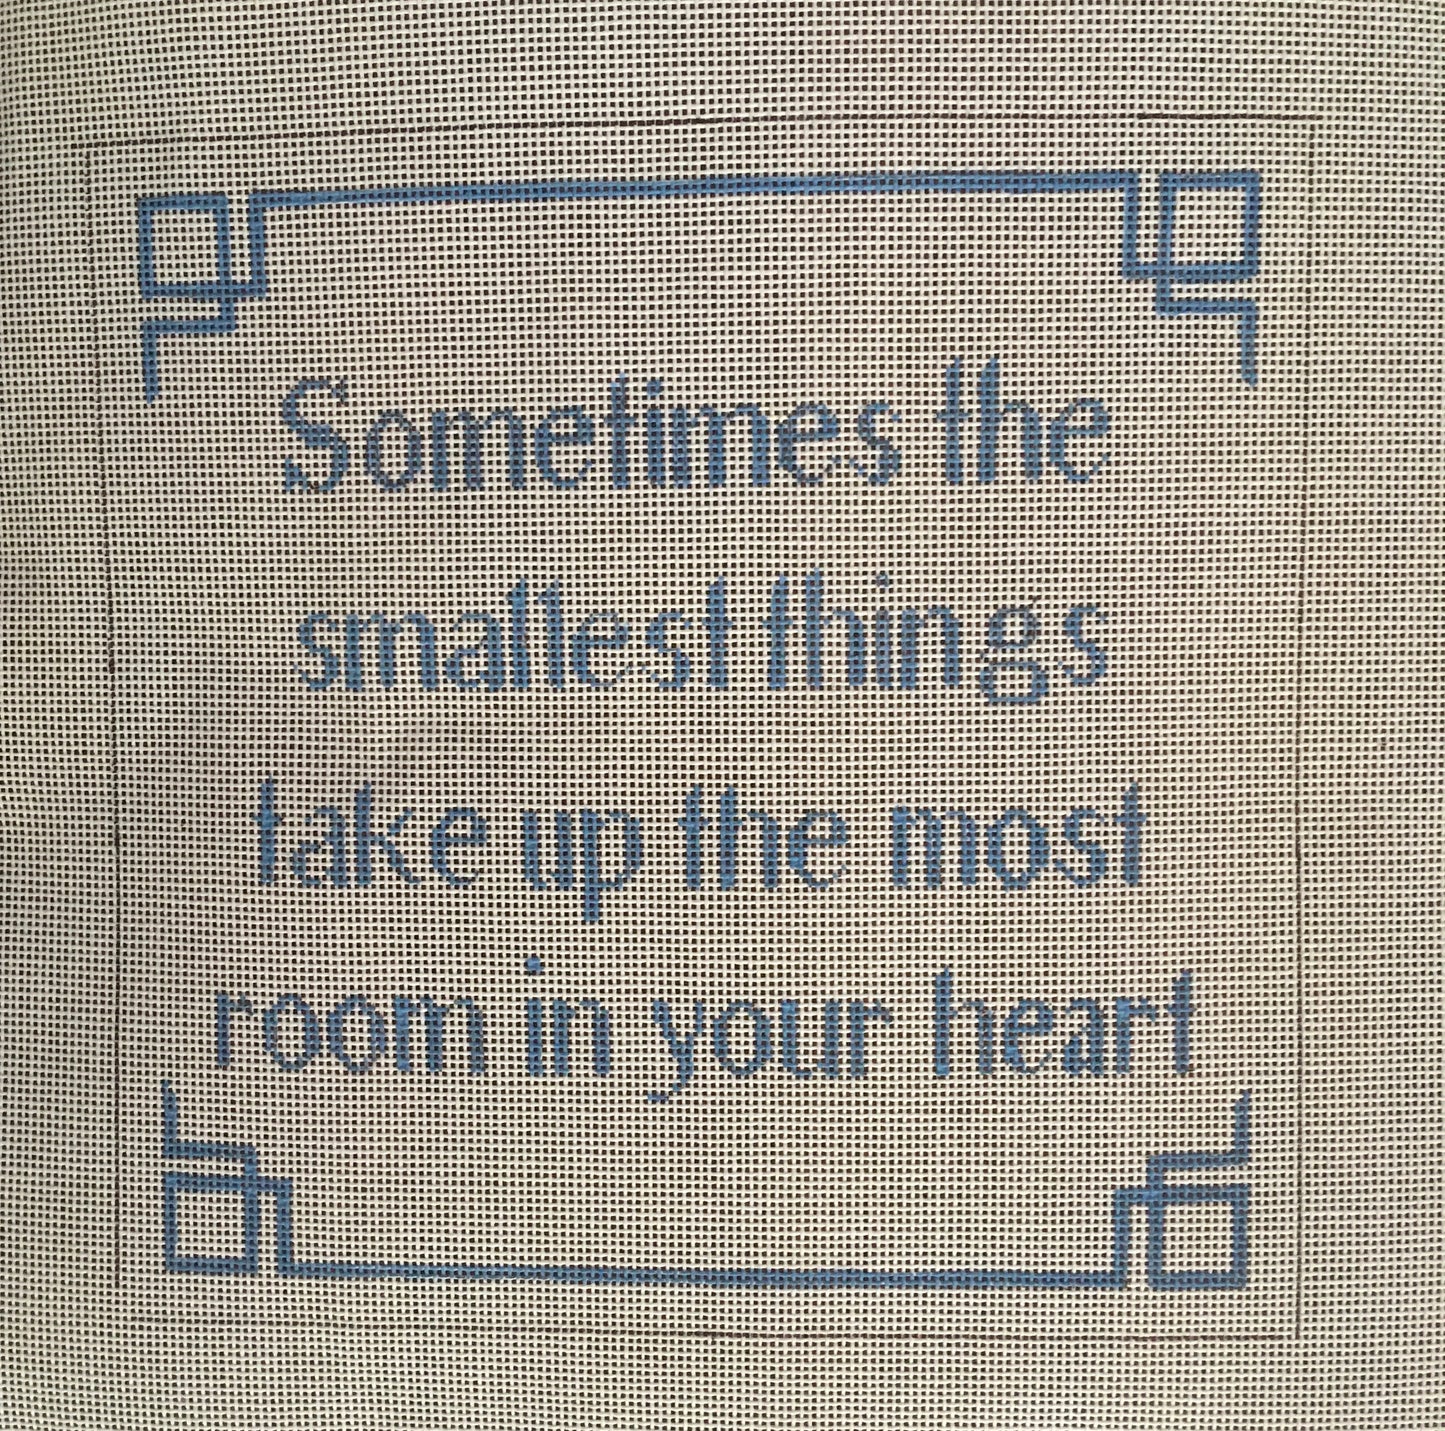 The Smallest things